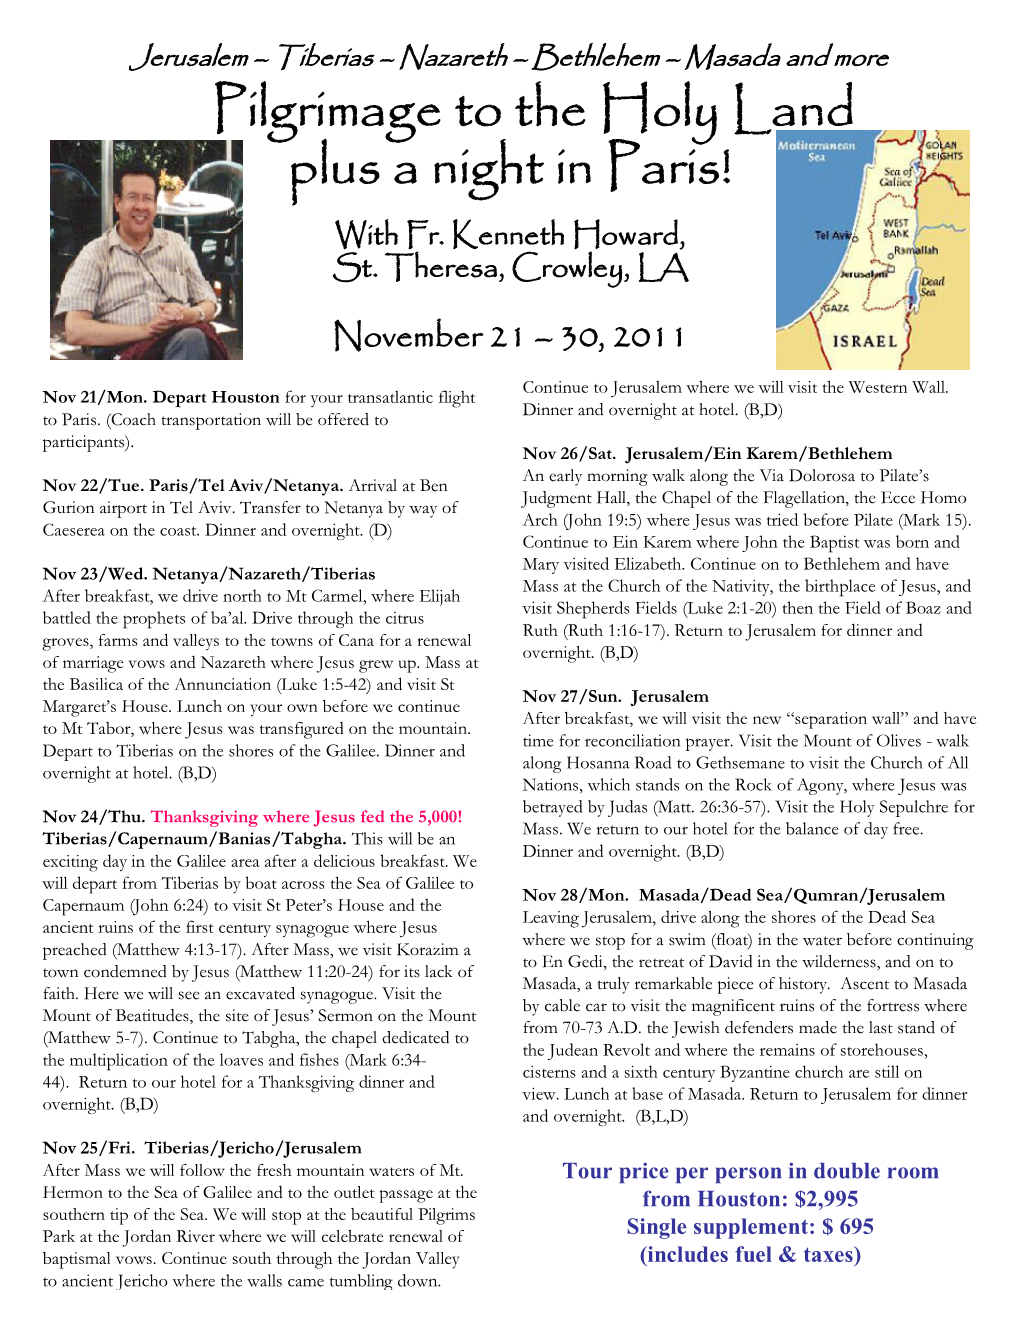 Pilgrimage to the Holy Land Plus a Night in Paris! with Fr